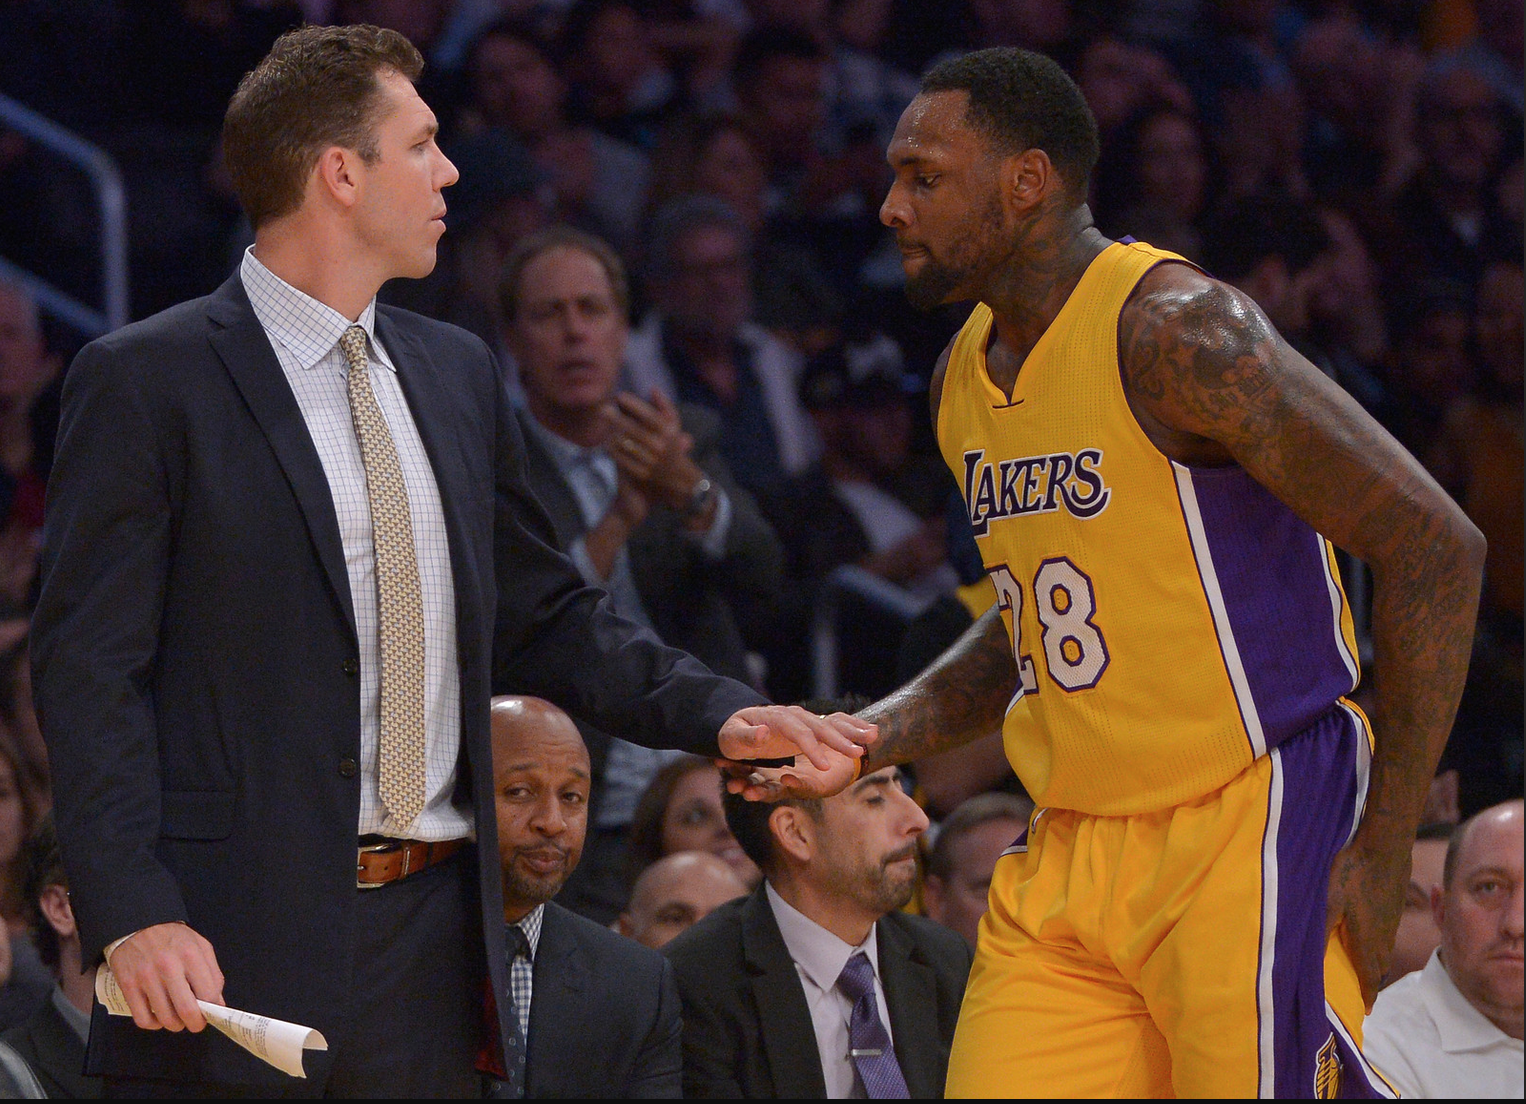 Los Angeles Lakers head coach Luke Walton shakes hands with Los Angeles Lakers center Tarik Black #28 in the 4th quarter. The Los Angeles Lakers defeated the Brooklyn Nets 125-118 at Staples Center in Los Angeles, CA 11/15/2016. Photo by John McCoy/Los Angeles Daily News (SCNG)